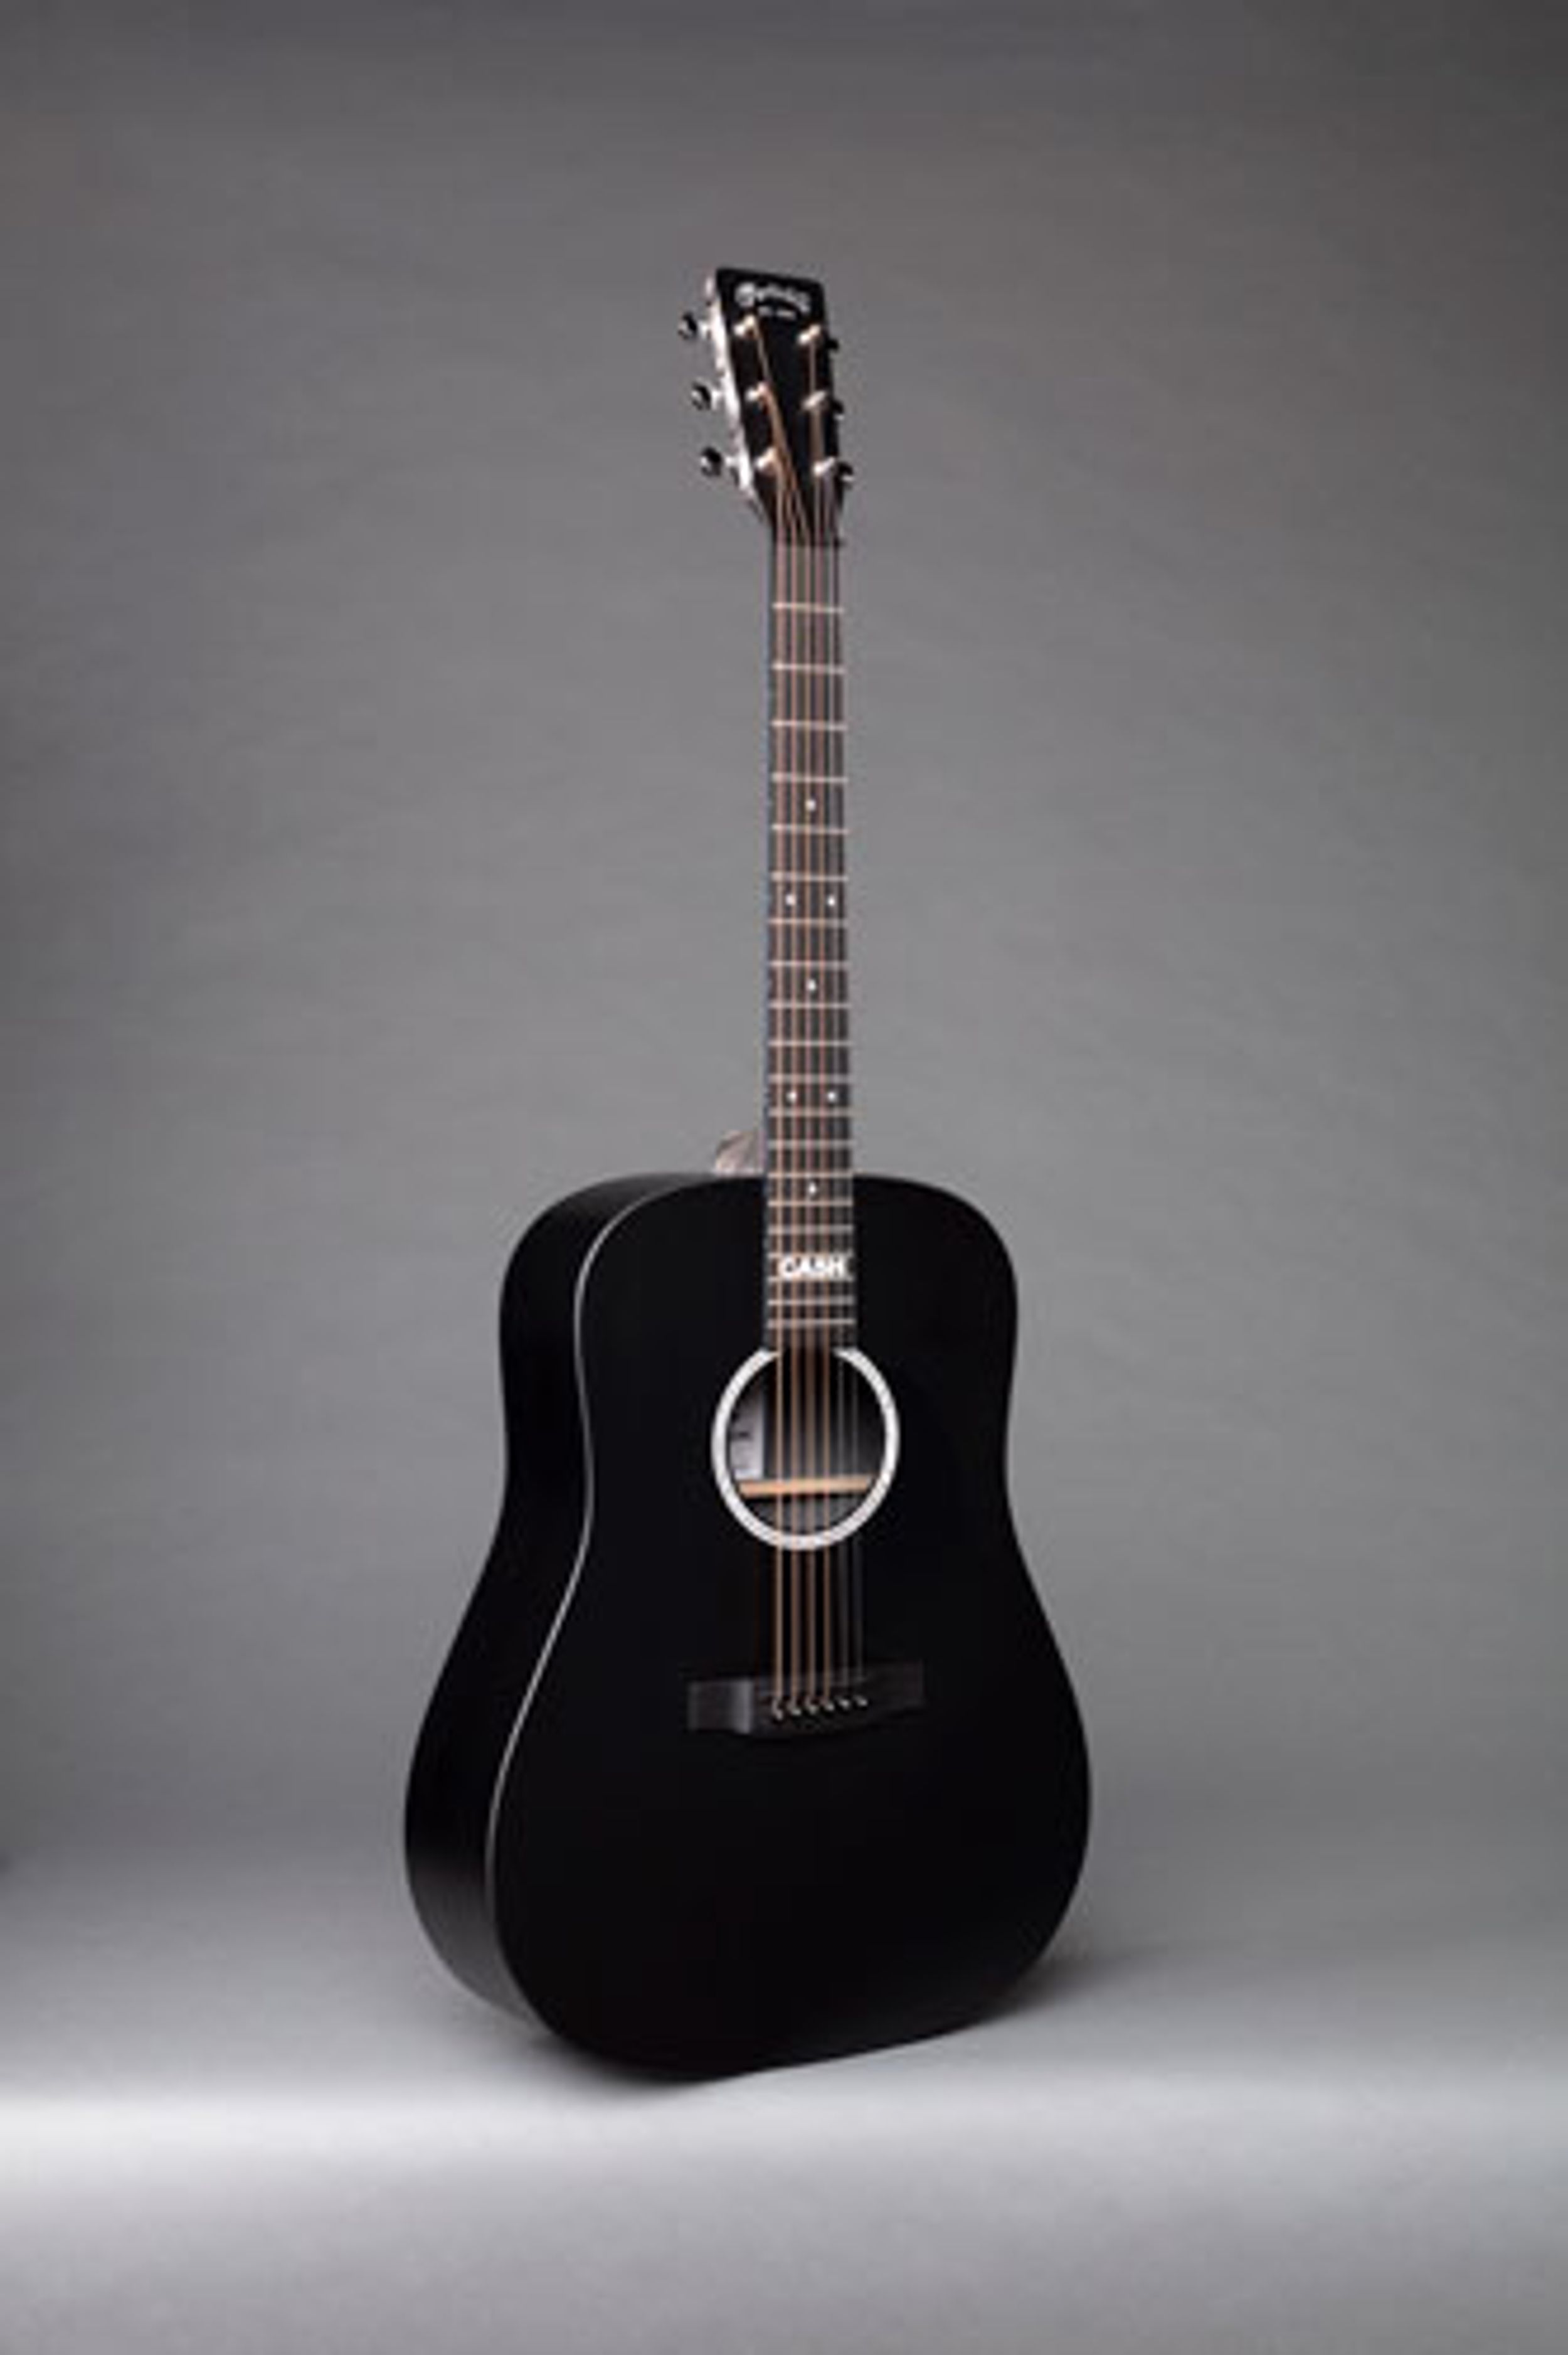 Martin Guitar and the Cash Foundation Introduce the DX Johnny Cash Model